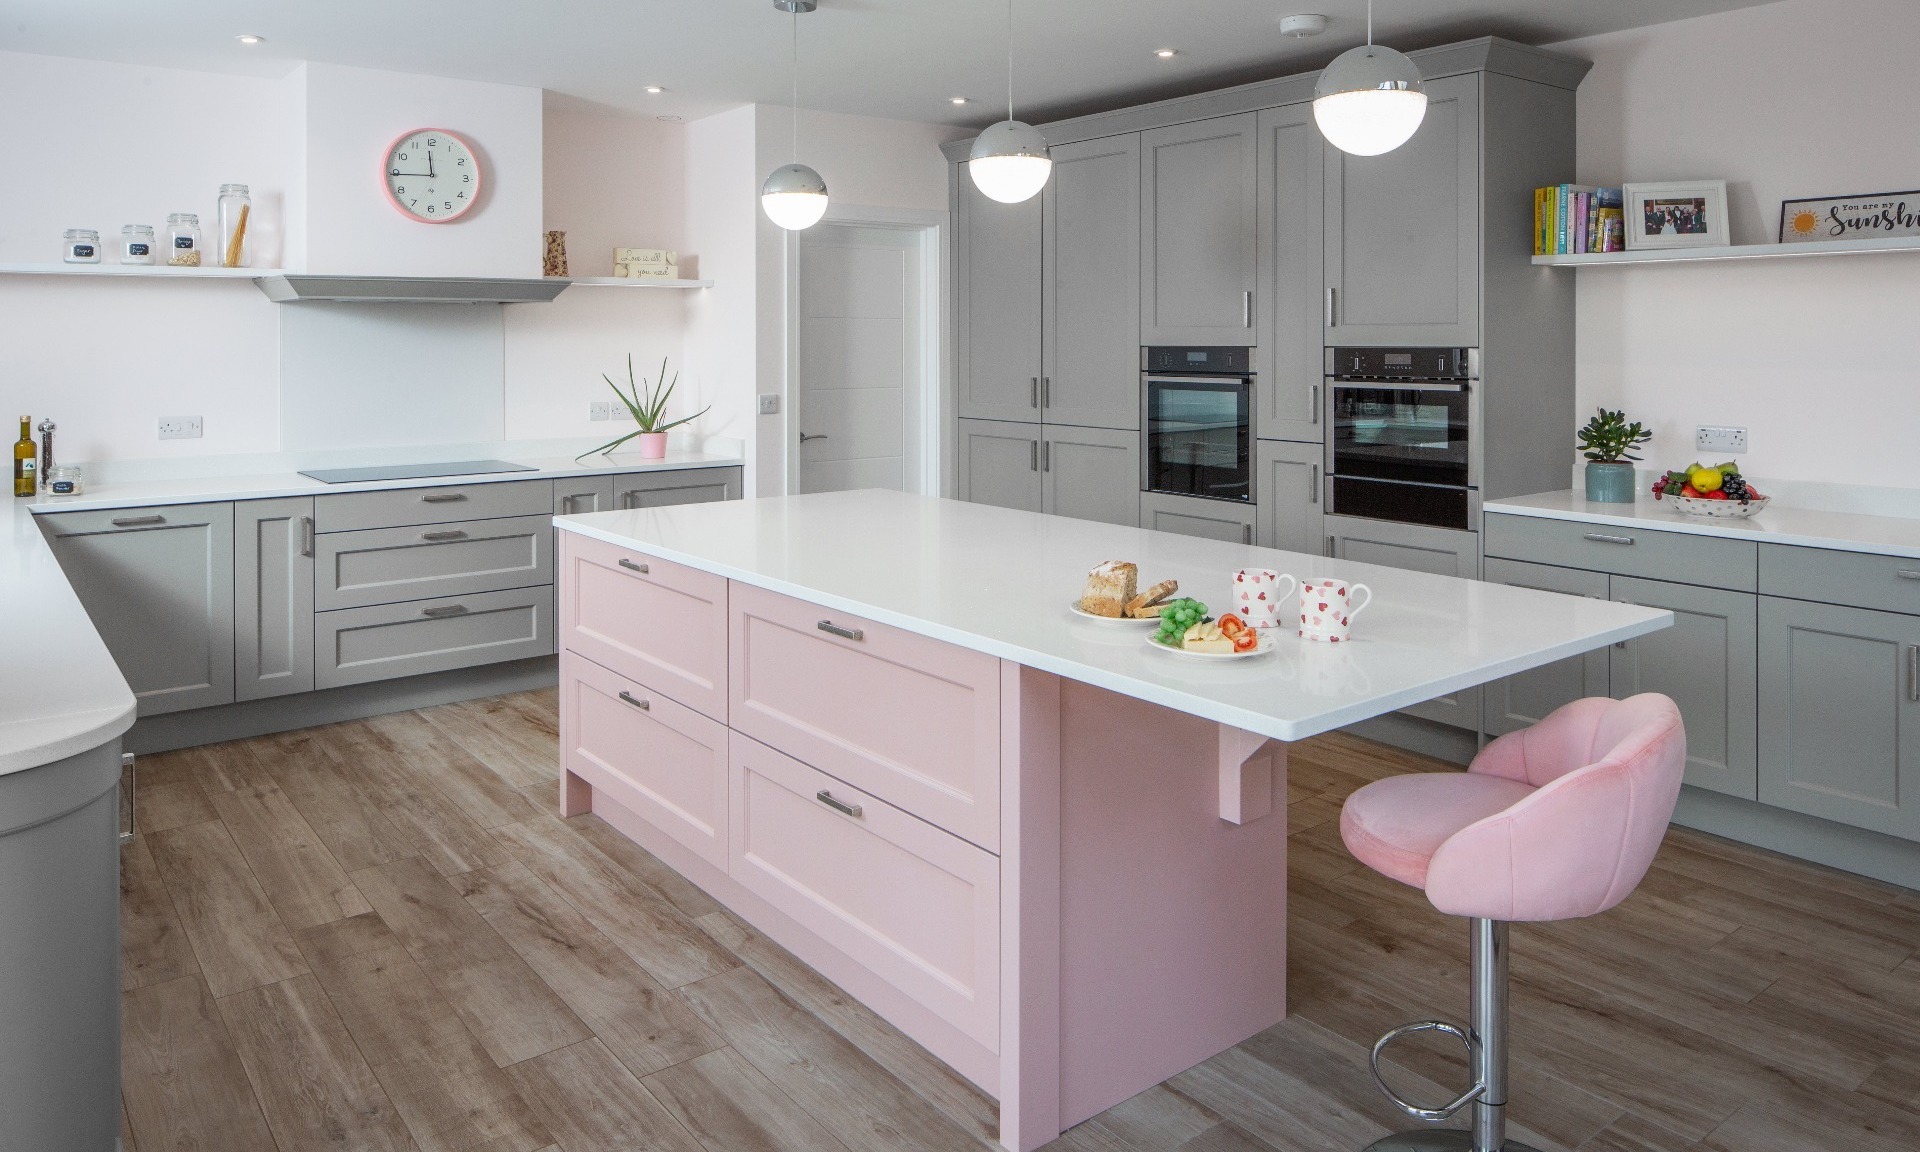 Stunning smooth painted Shaker style kitchen